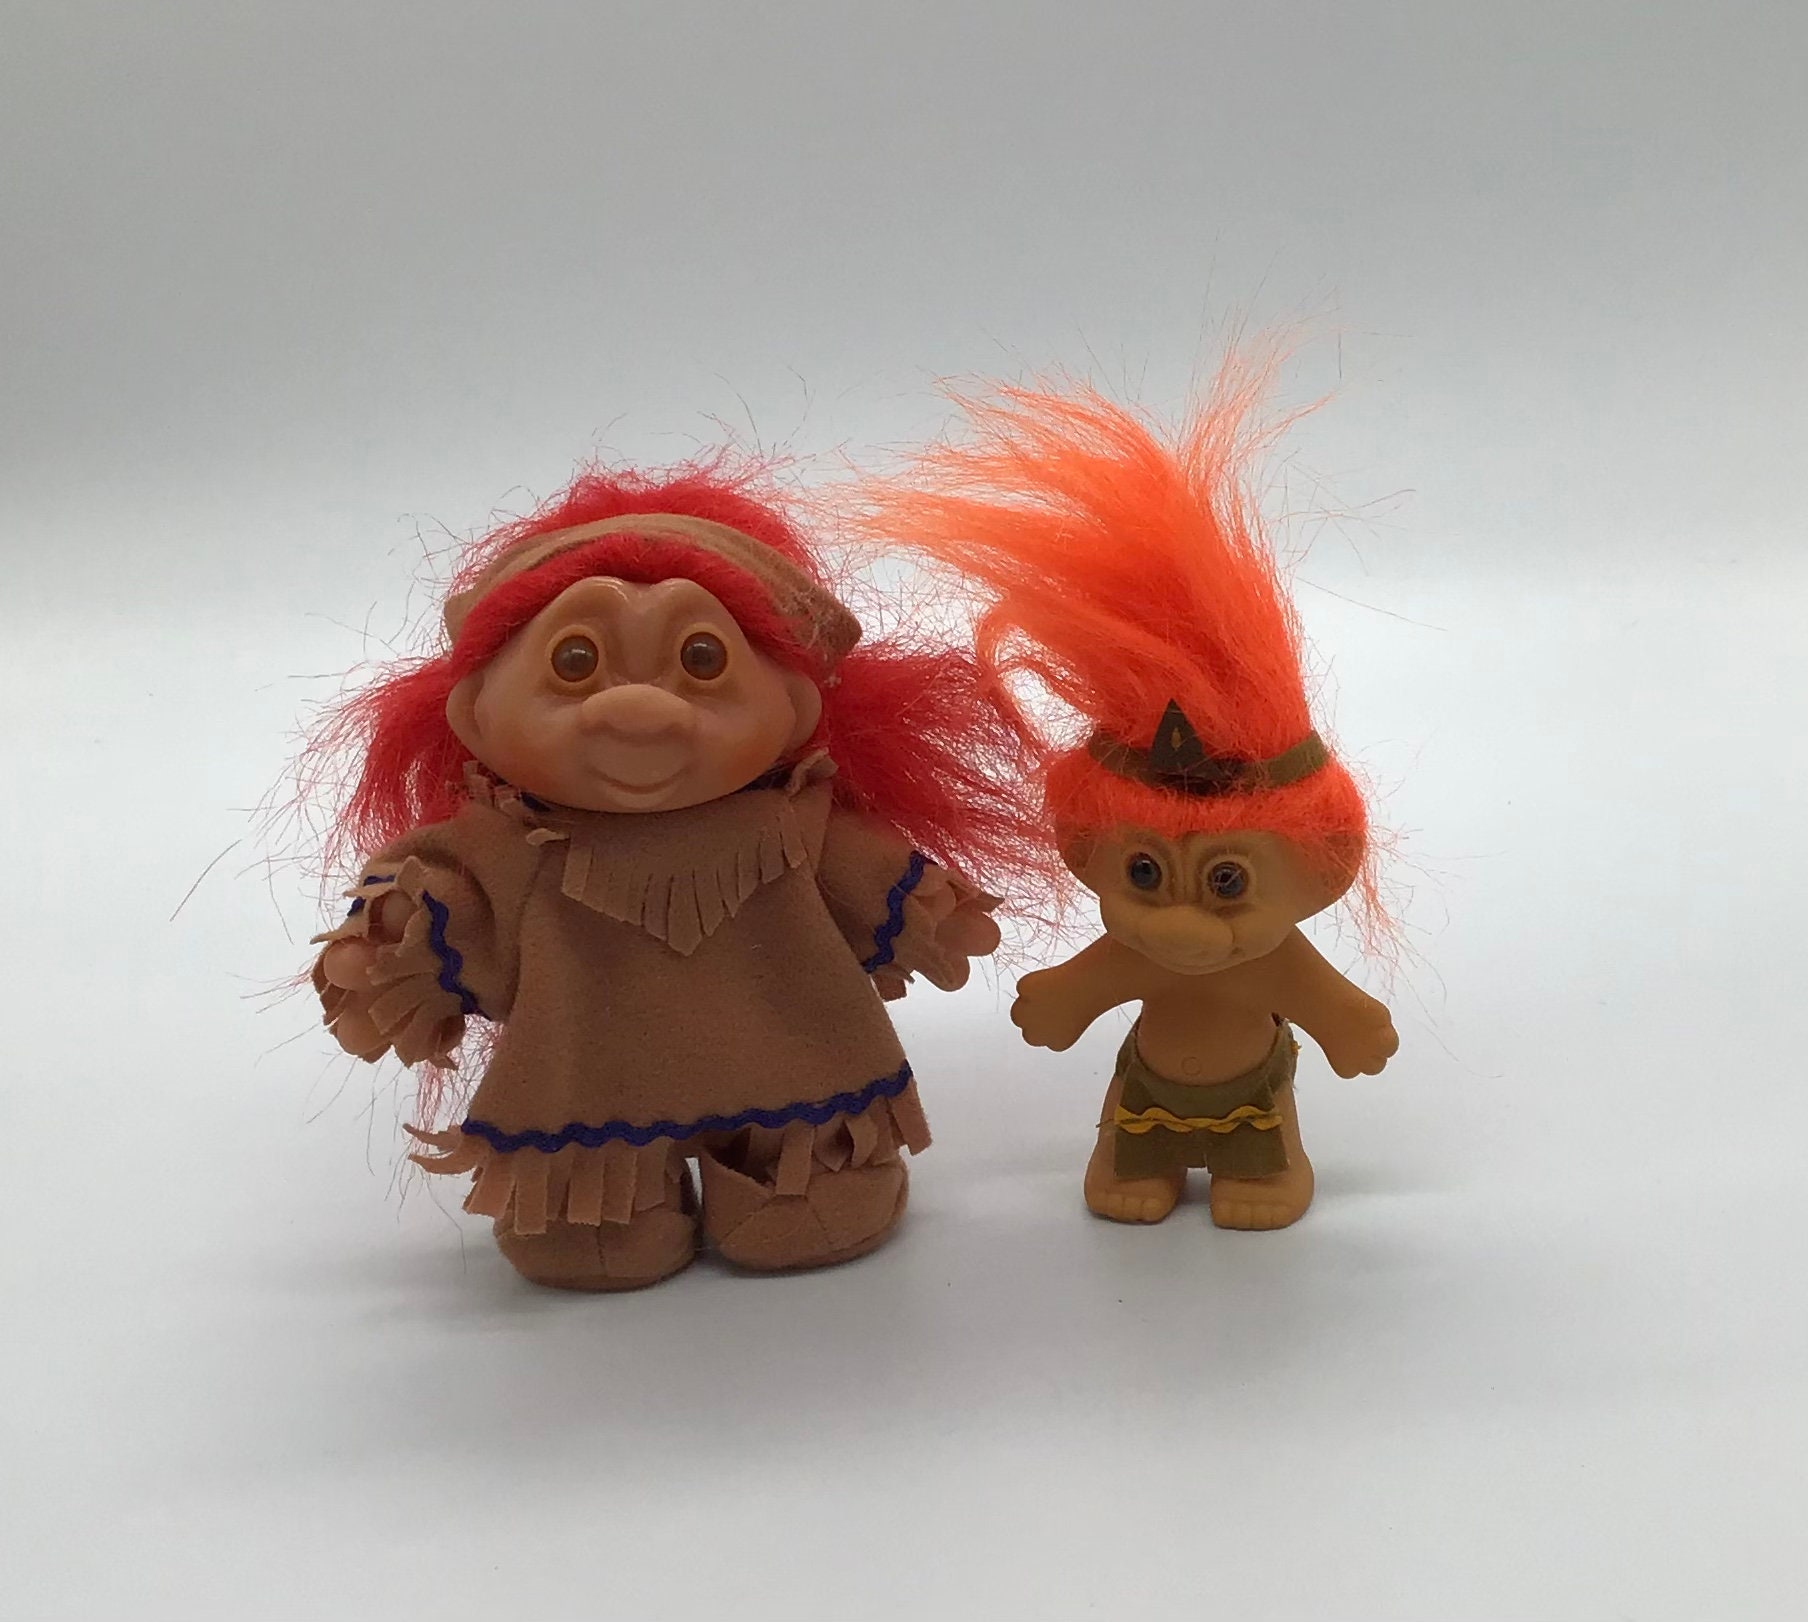 5" Russ Troll Doll NEW IN ORIGINAL WRAPPER AROUND THE WORLD MEXICO 